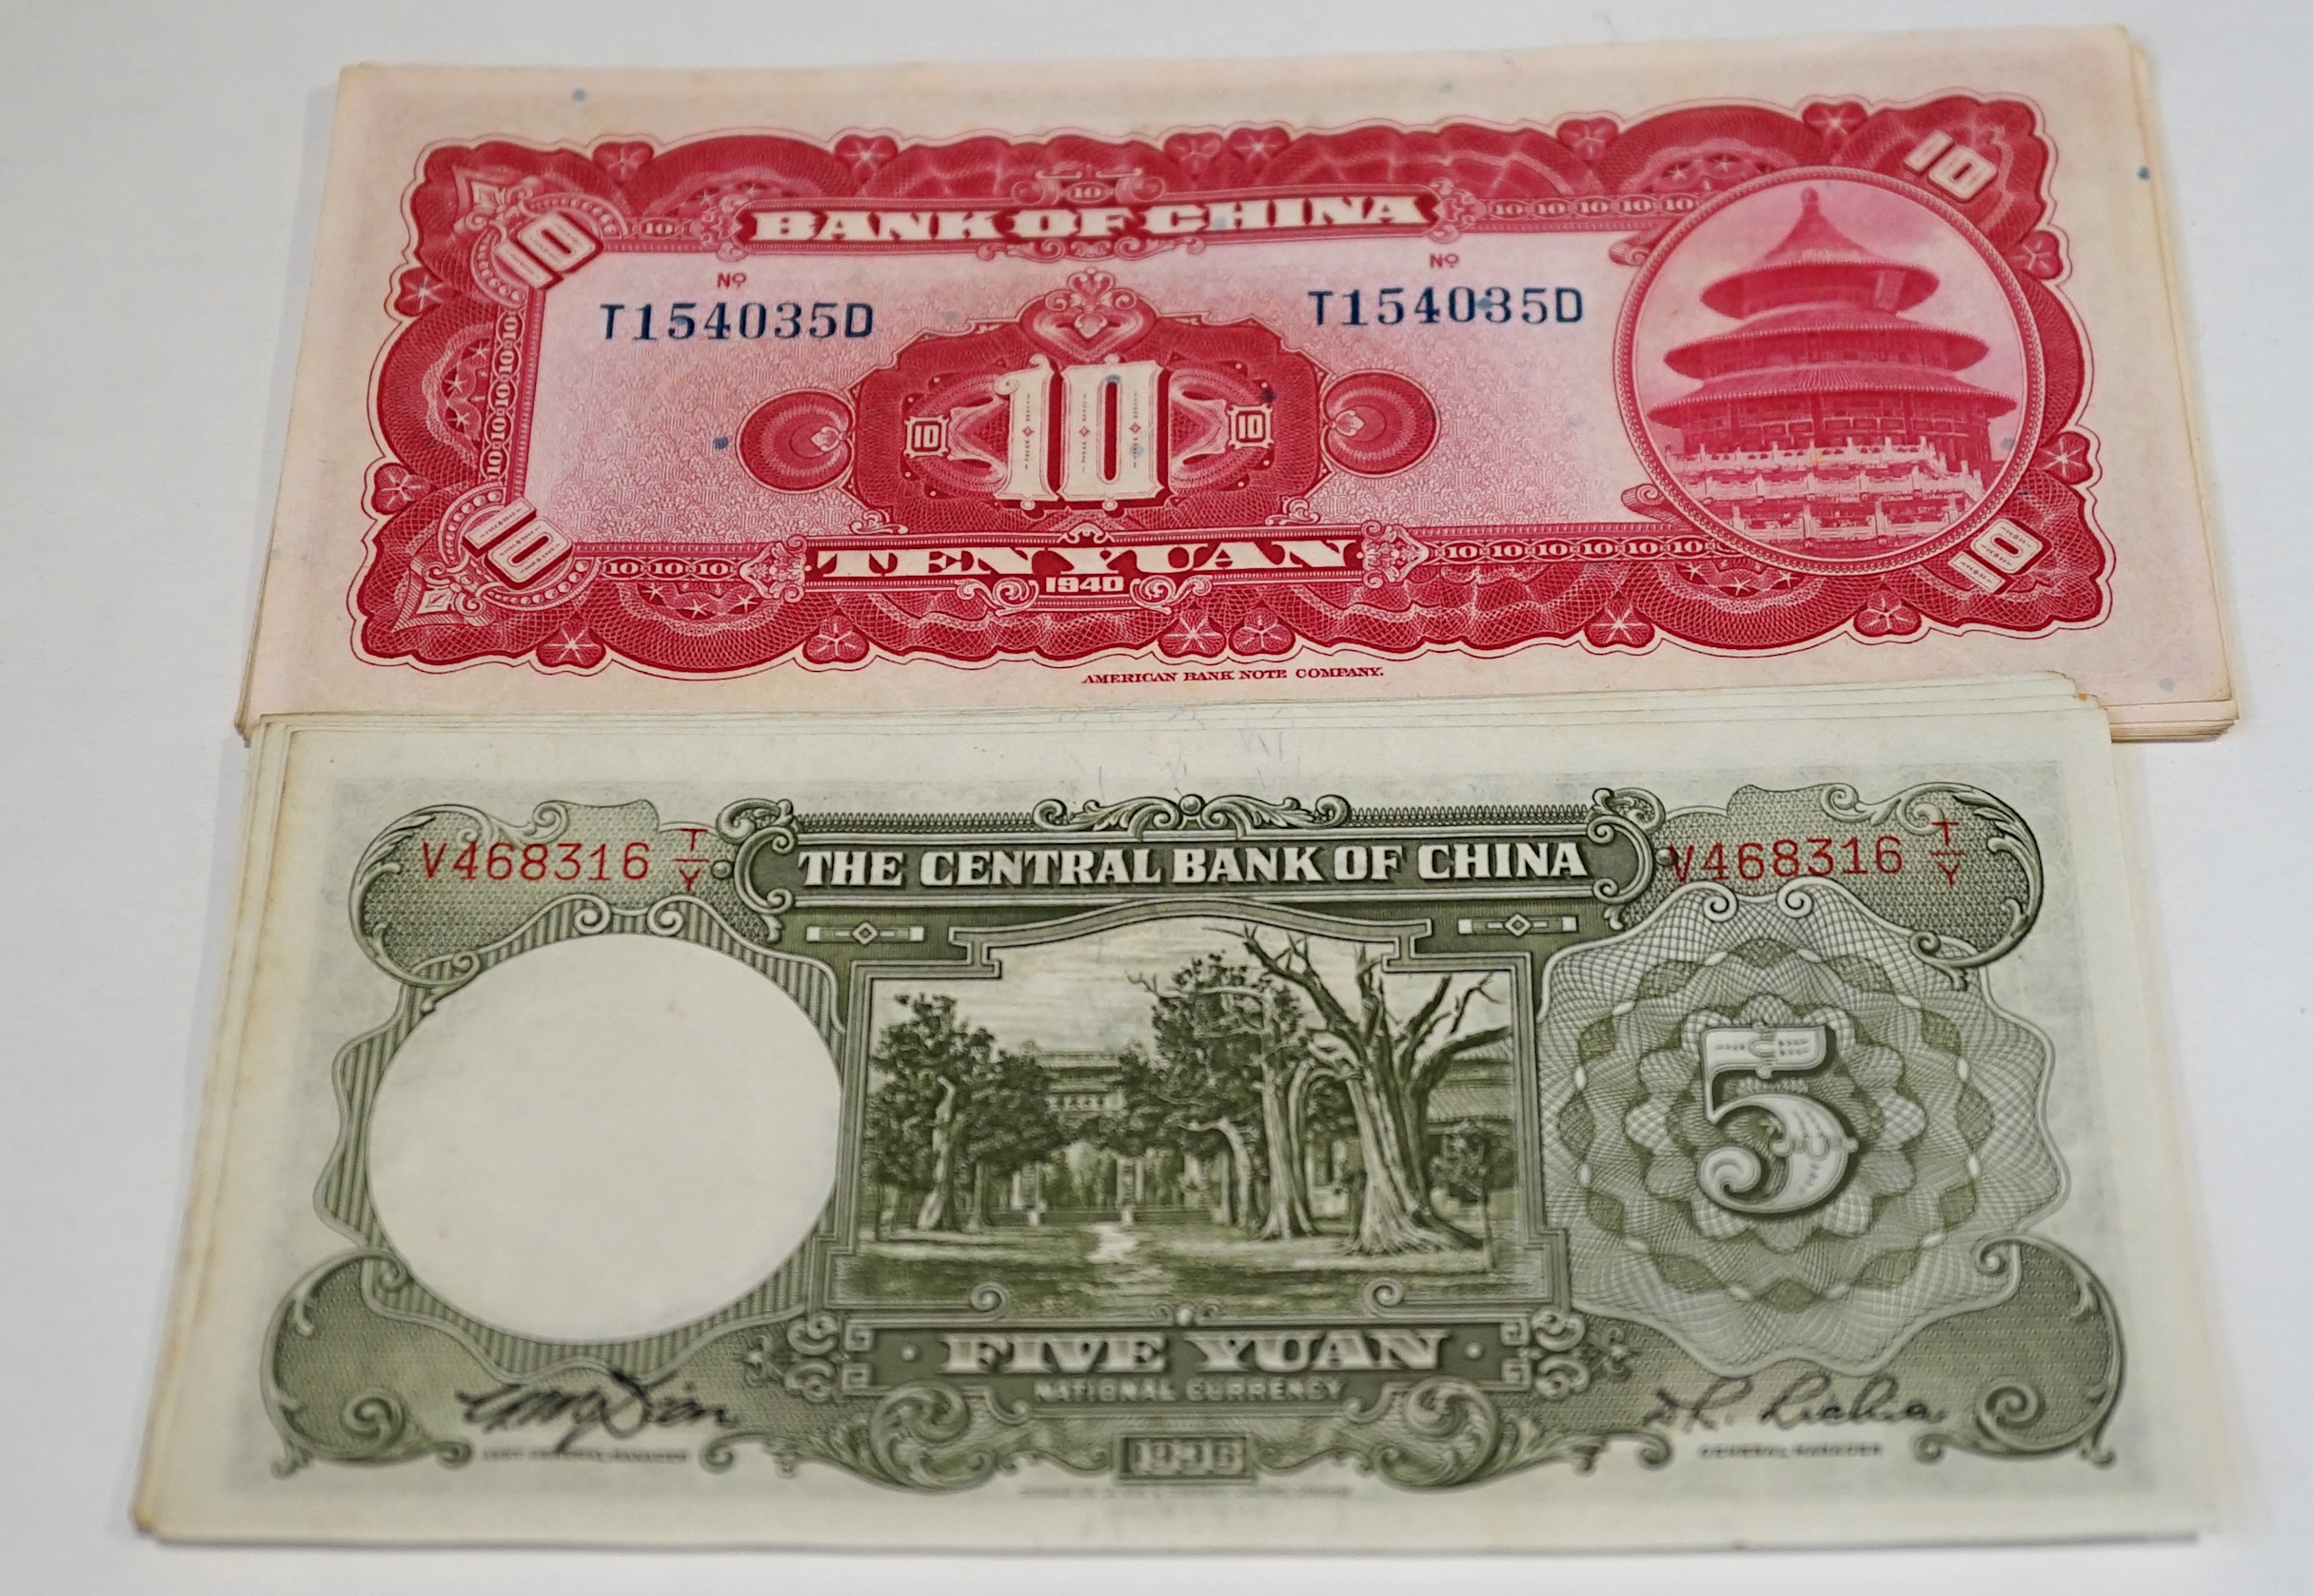 World Bank notes, good VF to UNC, to include a run of 9 consecutive central bank of China five yuan 1936, a run of 10 consecutive Bank of China 10 yuan 1940, Bank of England £1 notes, Elizabeth II, Taiwan, Brazil, Poland